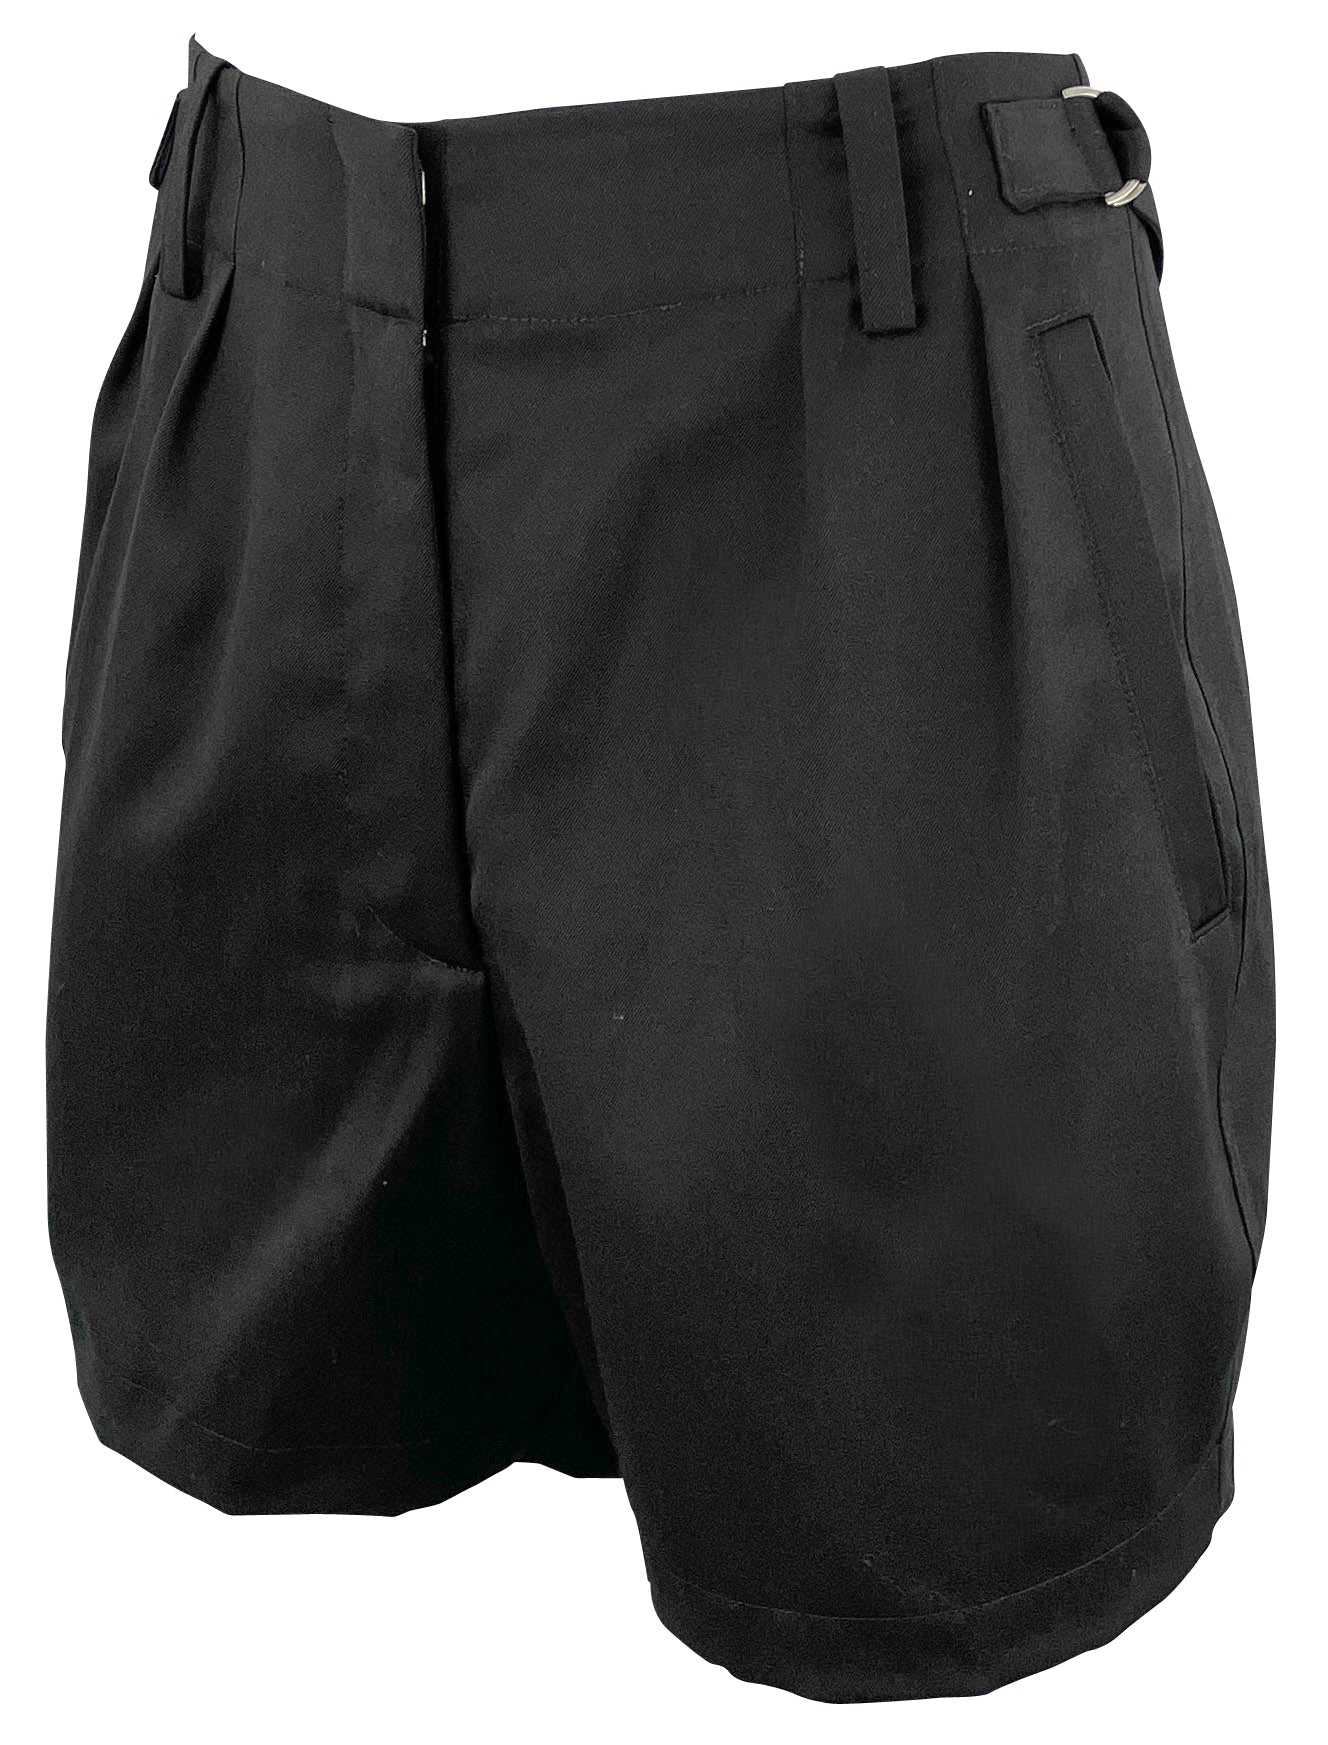 Maria Cher. Pleated Shorts in Black - Discounts on Maria Cher. at UAL